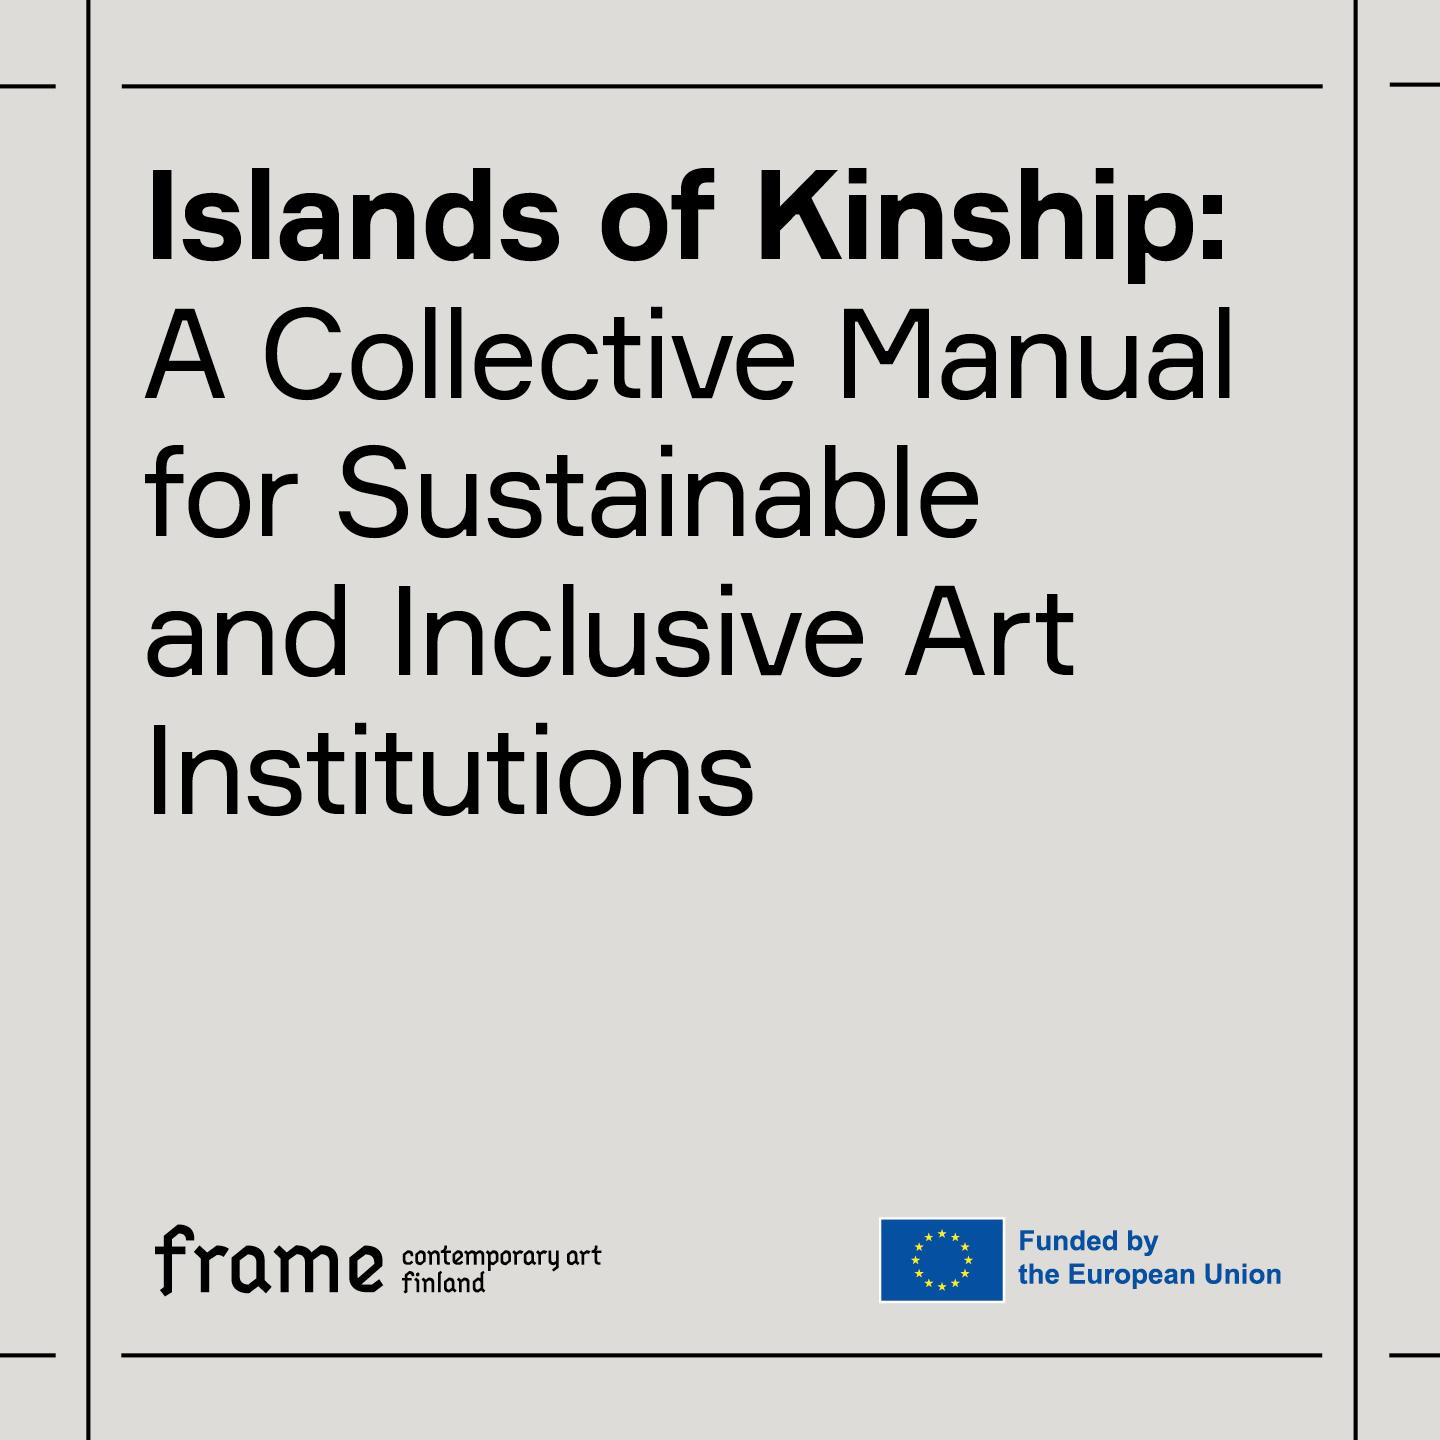 Image reads: Islands of Kinship: A collective Manual for Sustainable and Inclusive Art Institutions